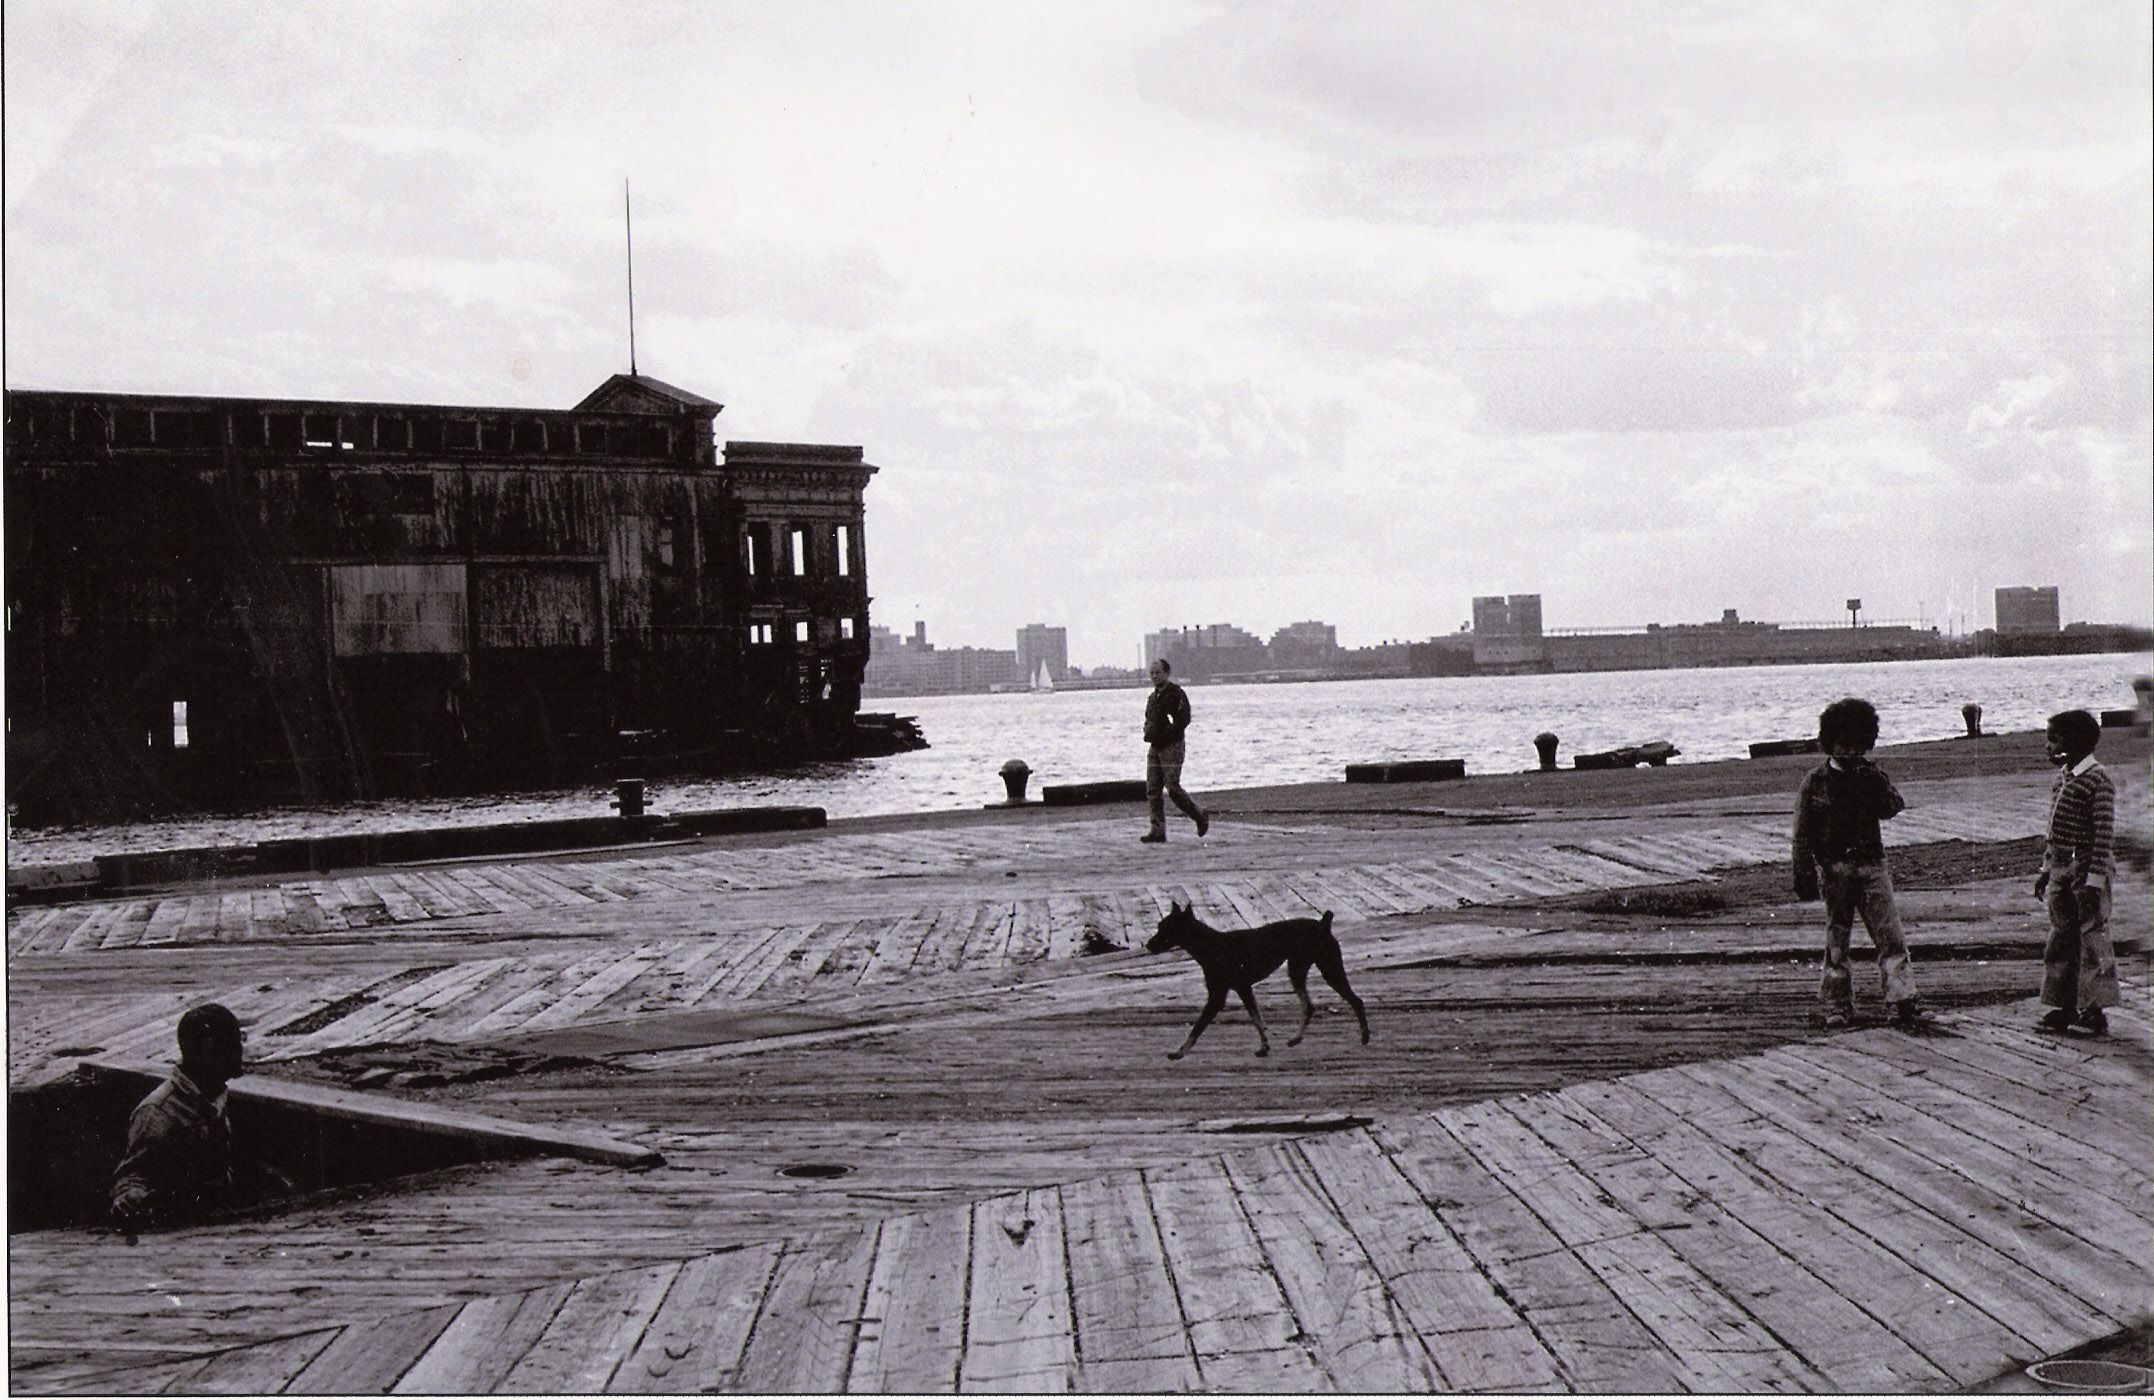 Adults, children anda dog on a wooden Hudson River pier.